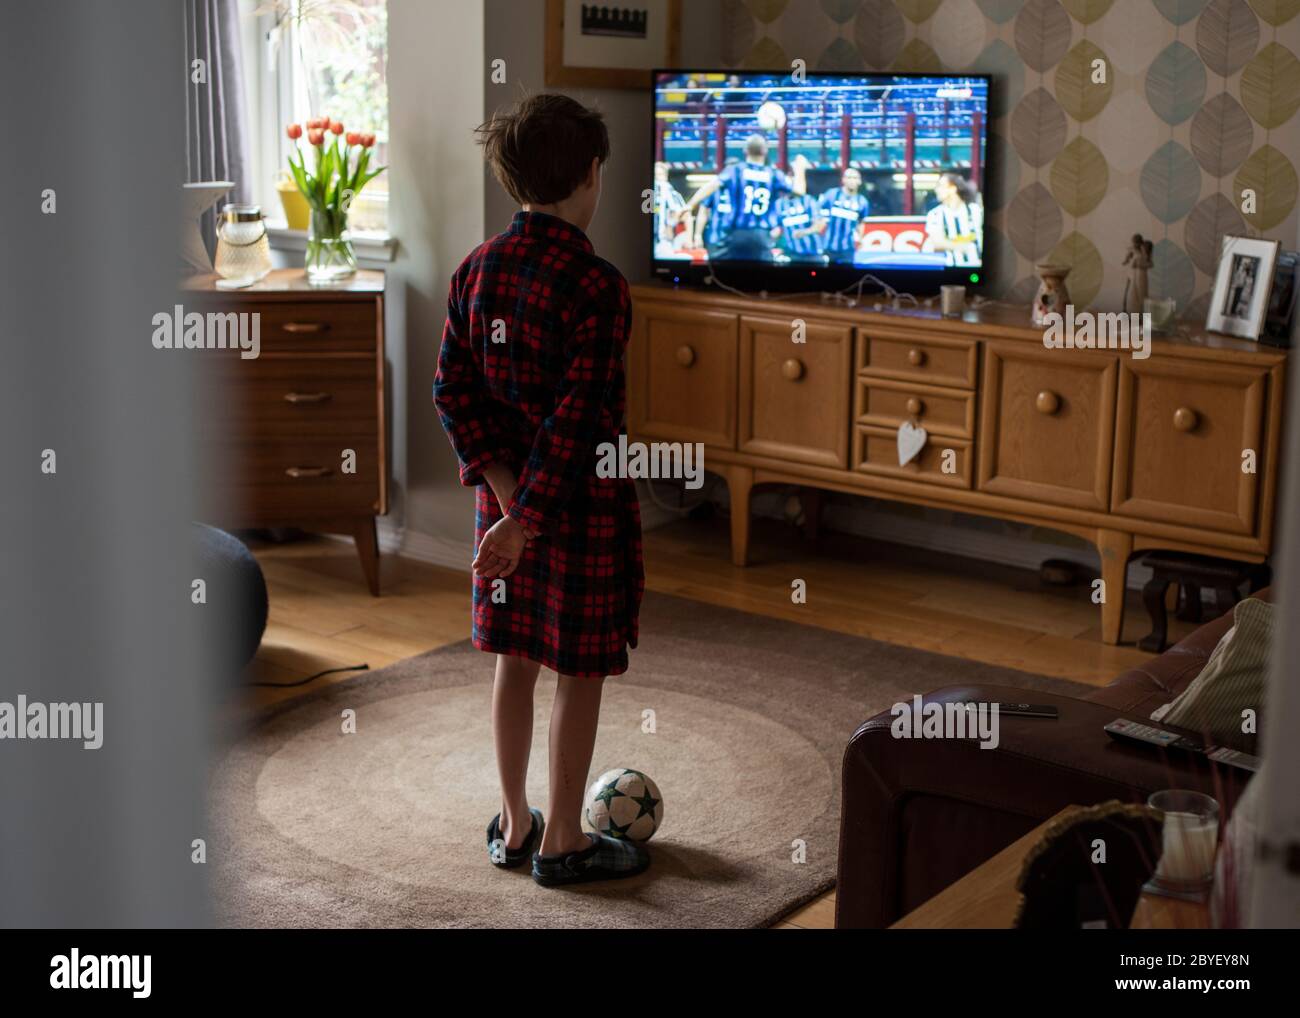 Dressing Gown Slippers High Resolution Stock Photography and Images - Alamy